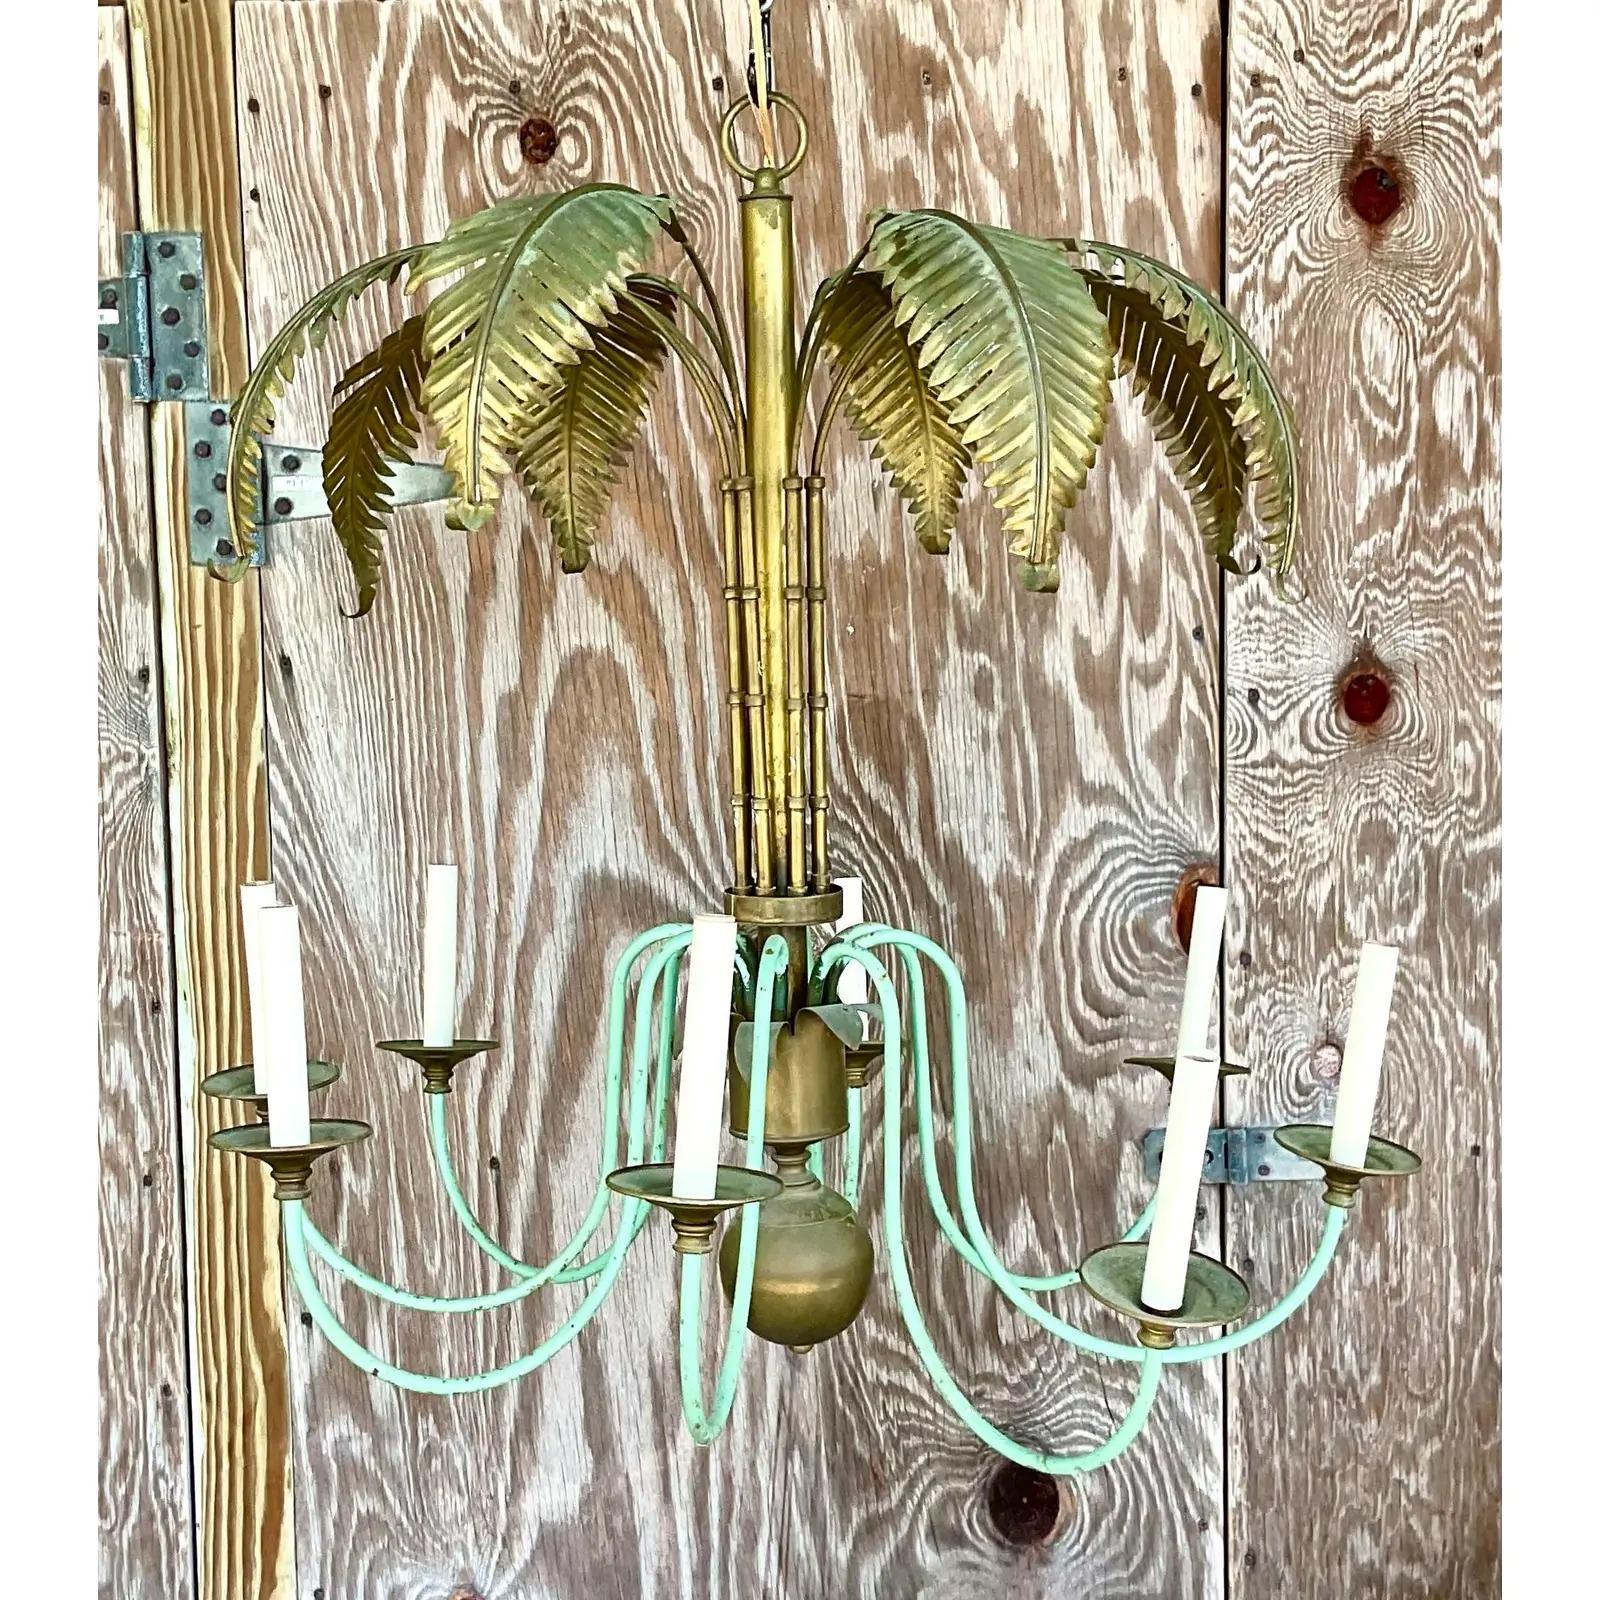 Incredible vintage Regency chandelier. Beautiful brass fronds with 8 pale green painted arms. A fabulous patina from time. Perfect as is or painting it white for a more Coastal look. Acquired from a Palm Beach estate.

The chandelier is in great